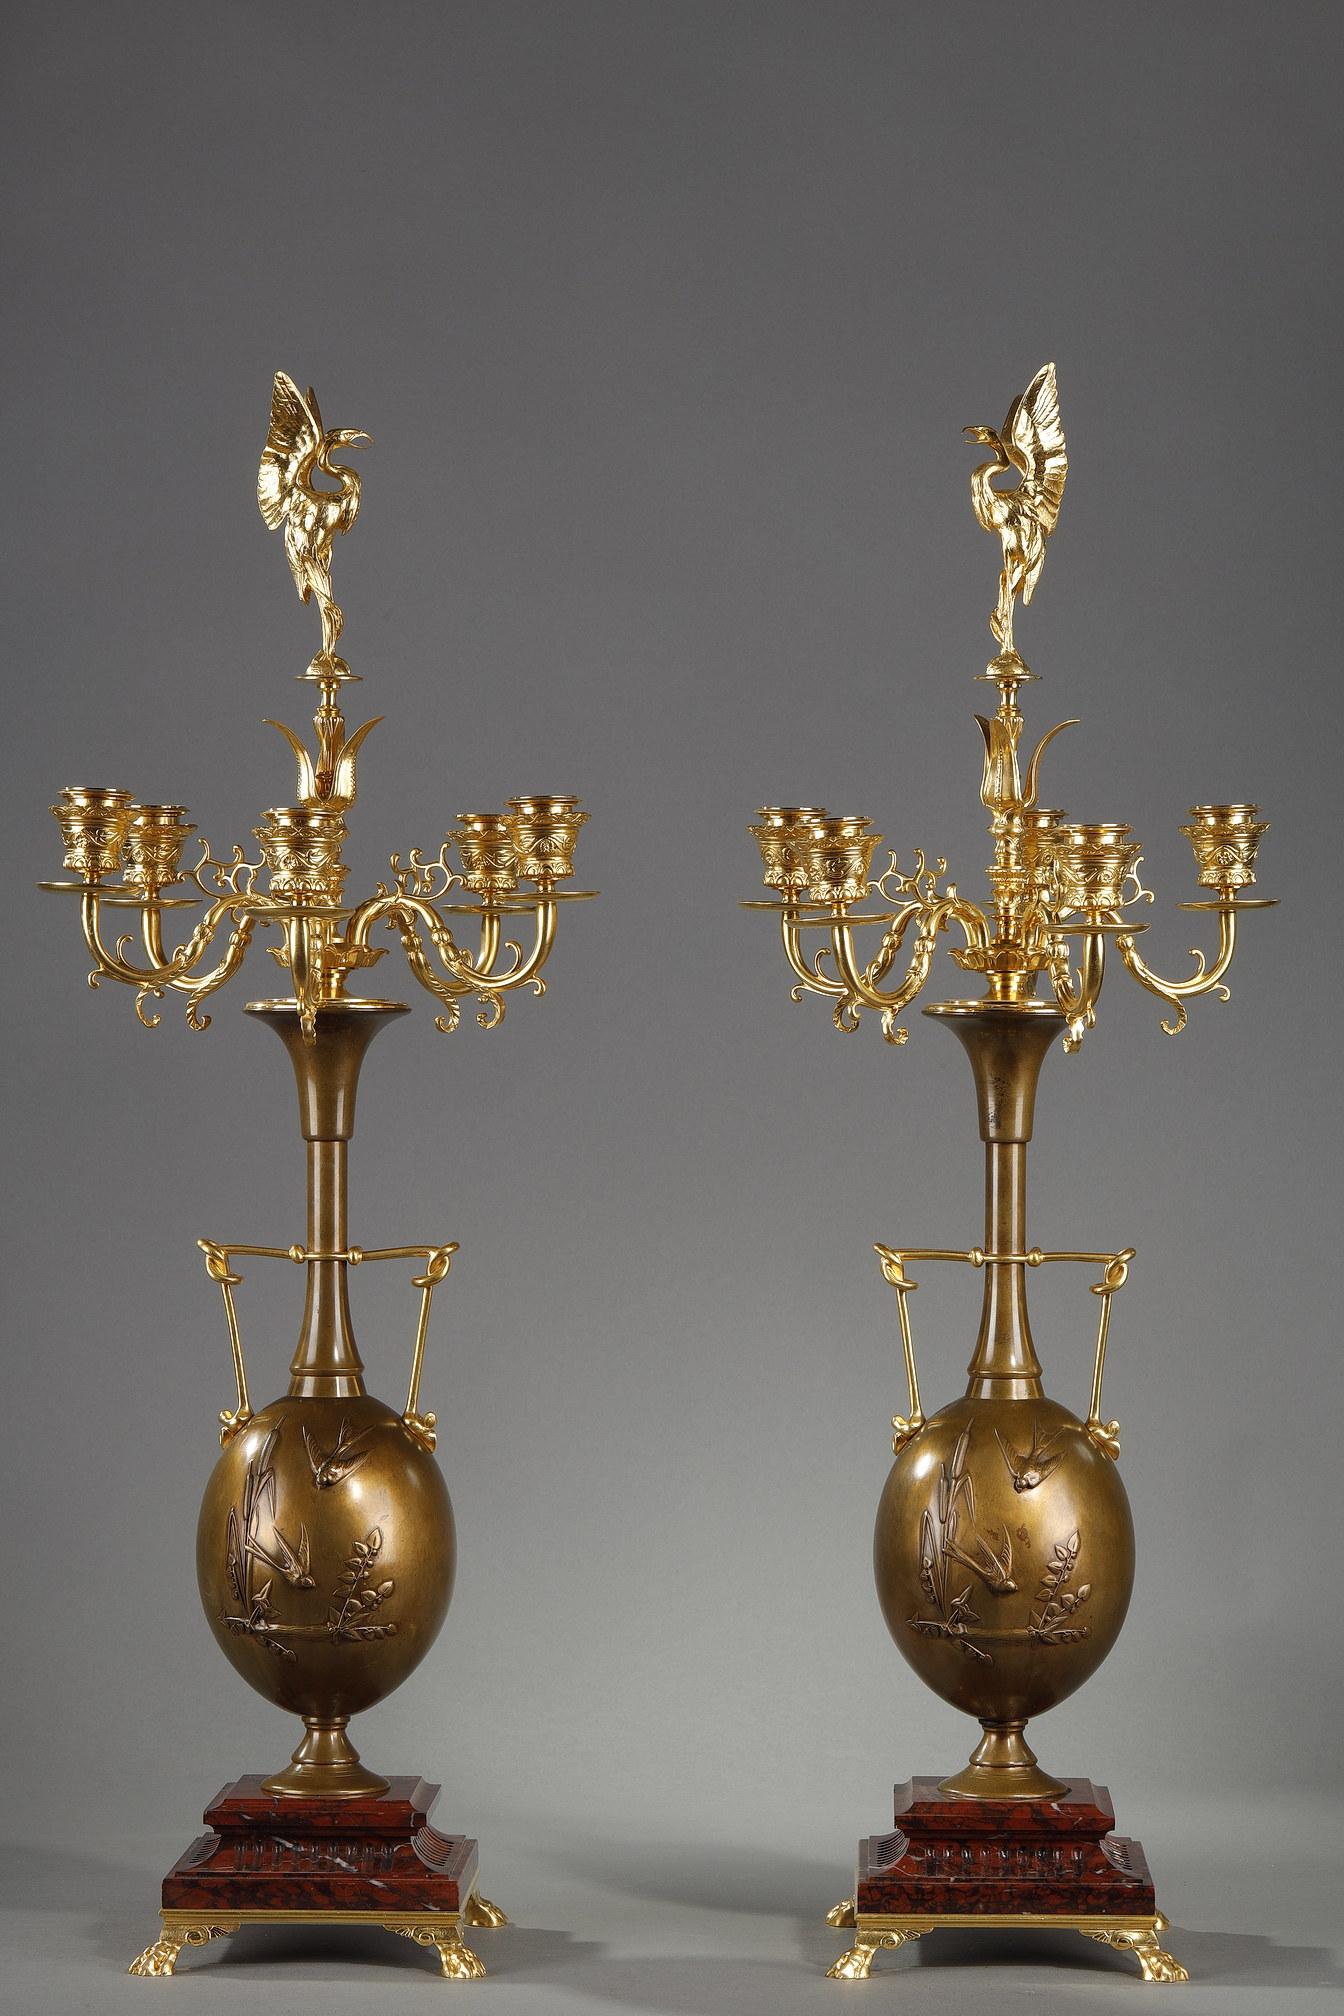 Pair of candelabras in bronze and bronze signed Henry Cahieux (1825-1854) and Ferdinand Barbedienne. The shaft in the shape of vase with two handles is decorated with birds among branches, from which escape four arms of light in gilded bronze topped